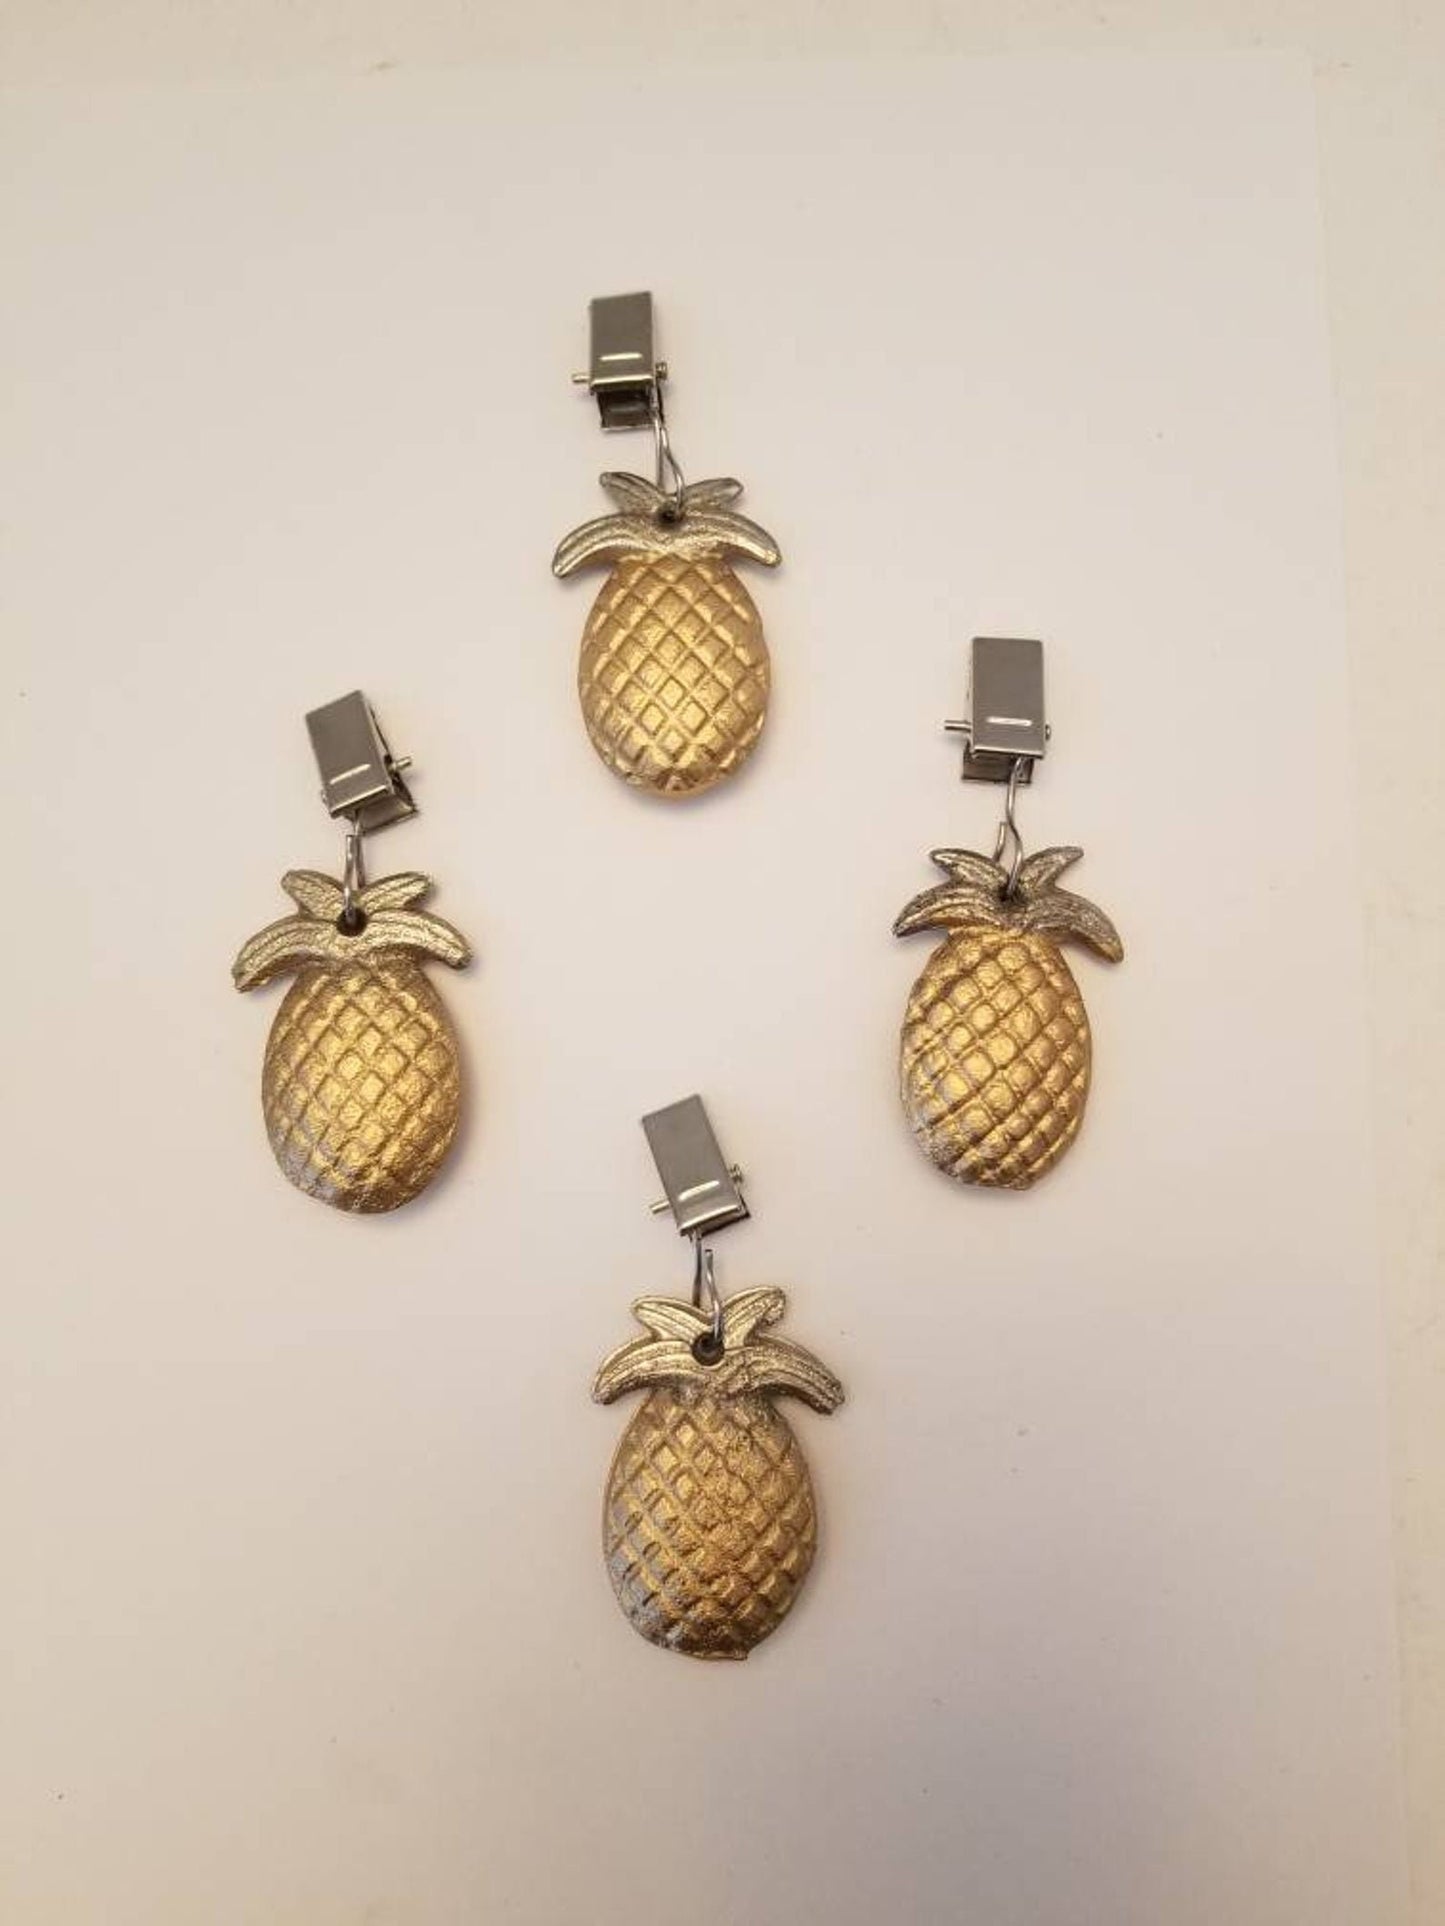 tablecloth weights picnic table weights pineapples